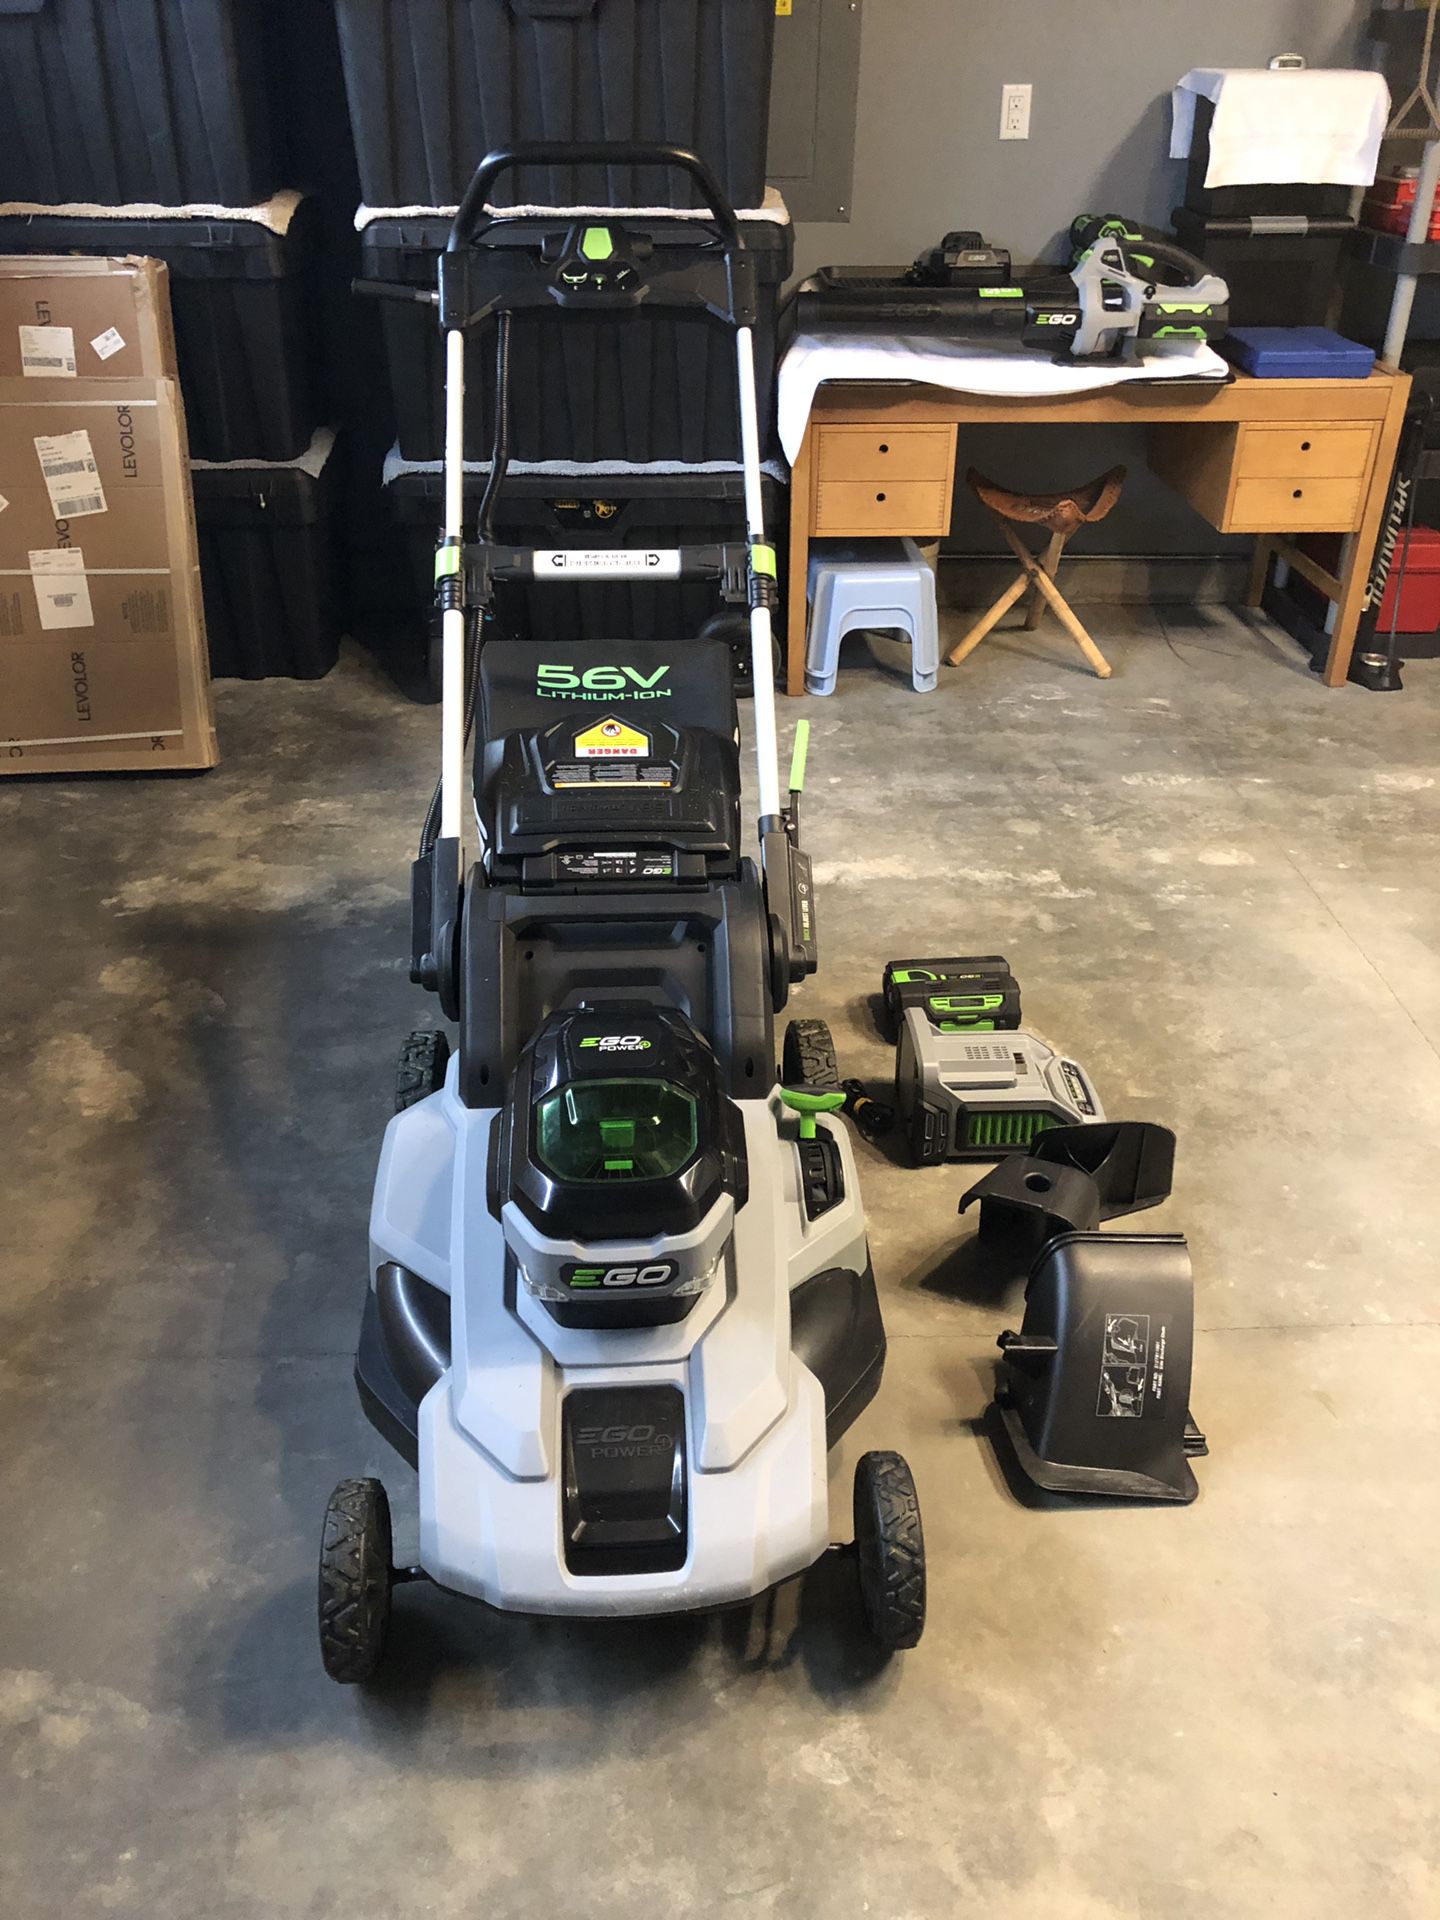 EGO Battery Operated Lawn Mower with battery and charger